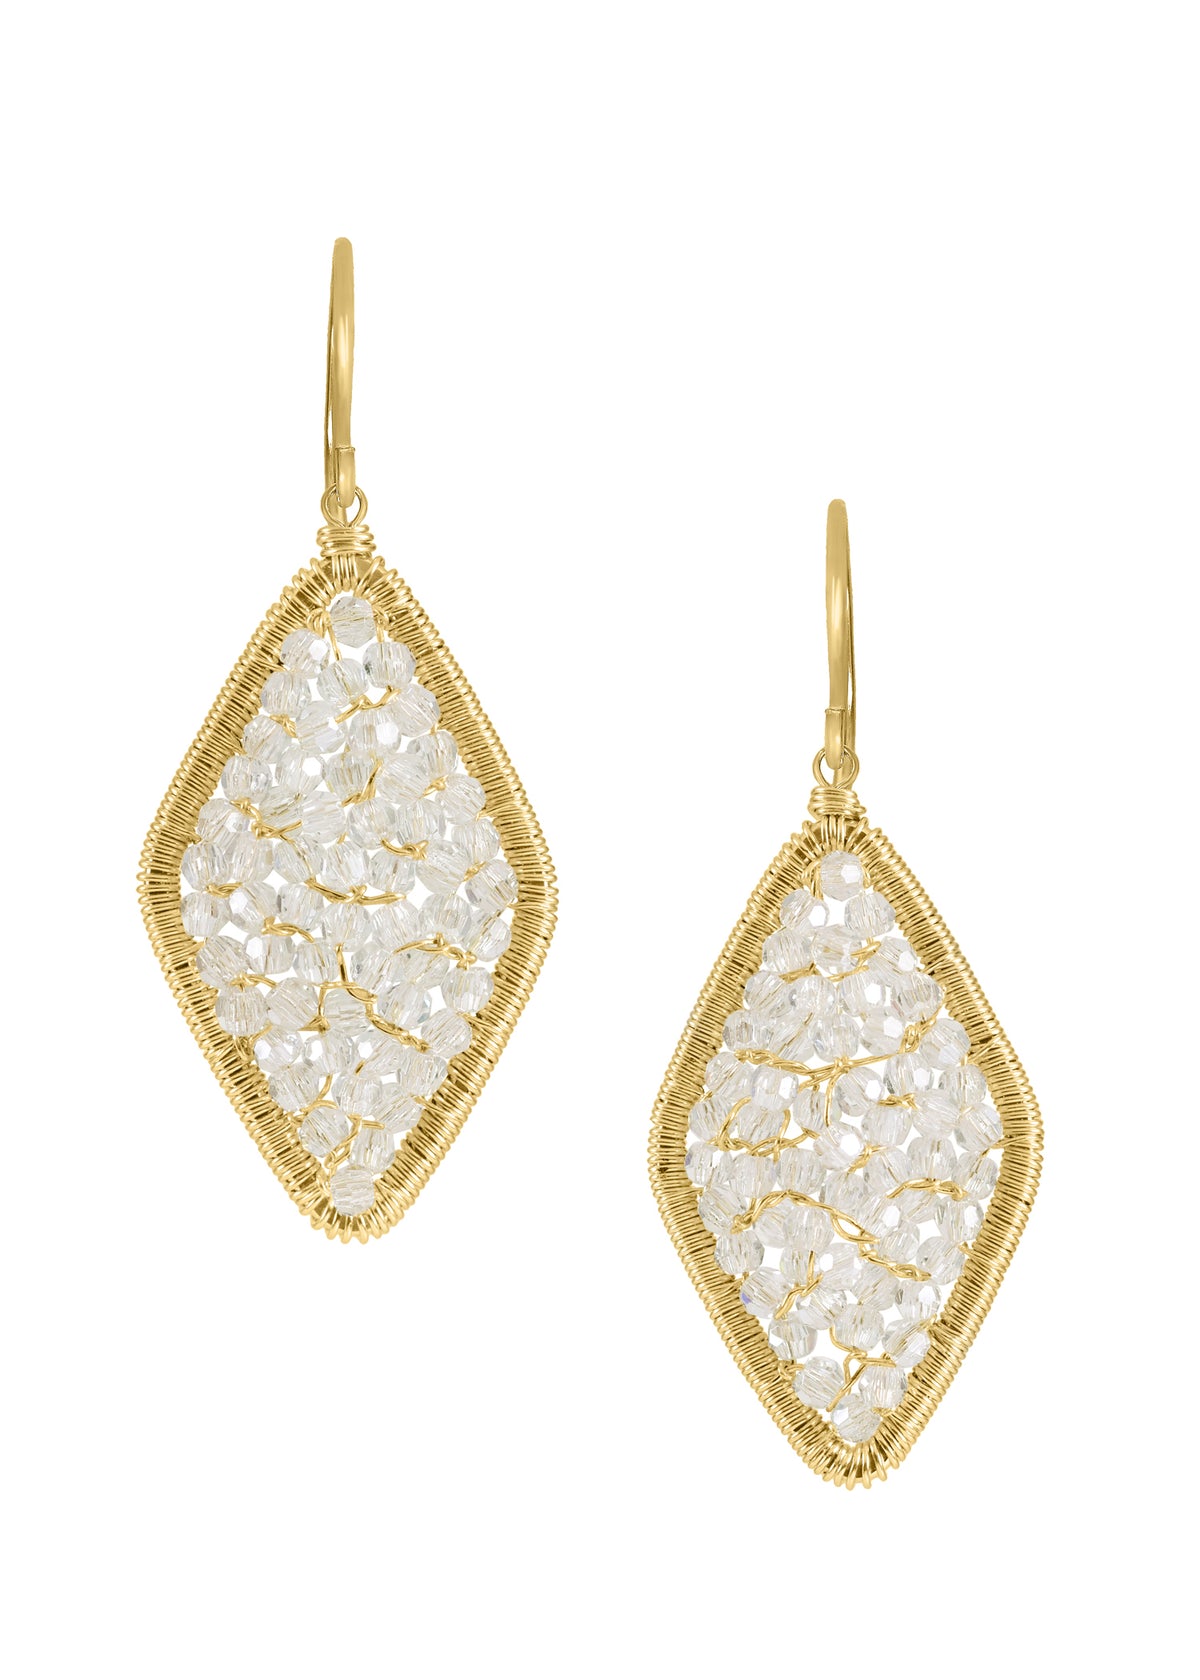 Crystal 14k gold fill Earrings measure 1-3/8&quot; in length (including the ear wires) and 9/16&quot; in width at the widest point Handmade in our Los Angeles studio